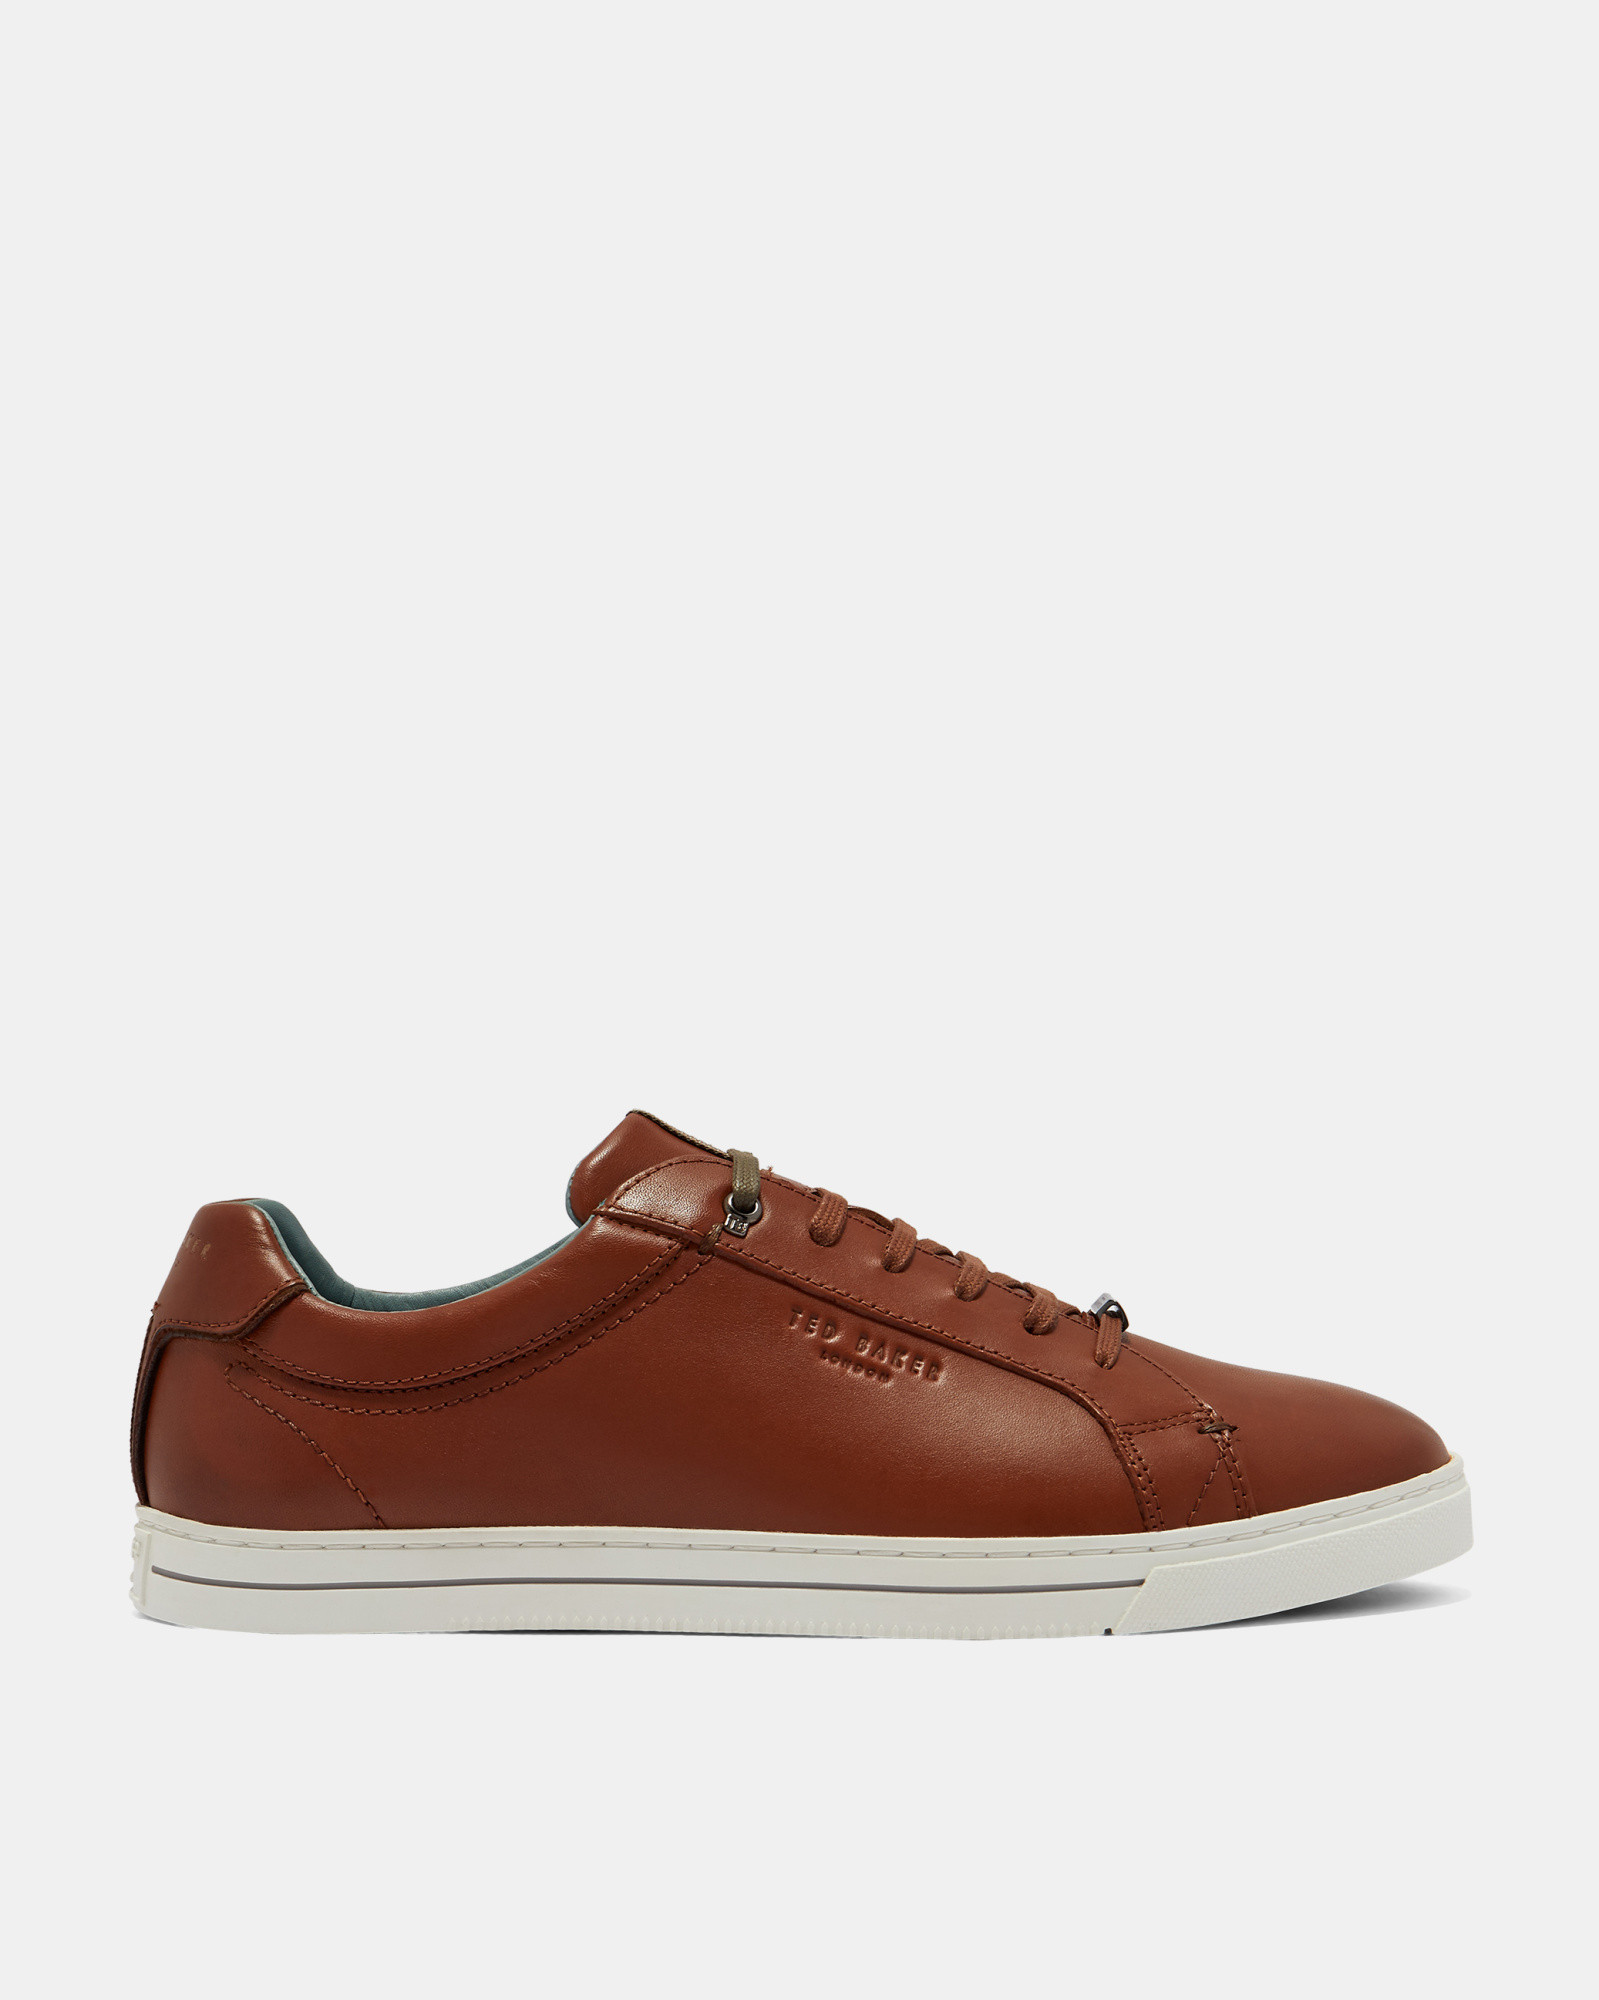 THAWNE Burnished leather sneakers